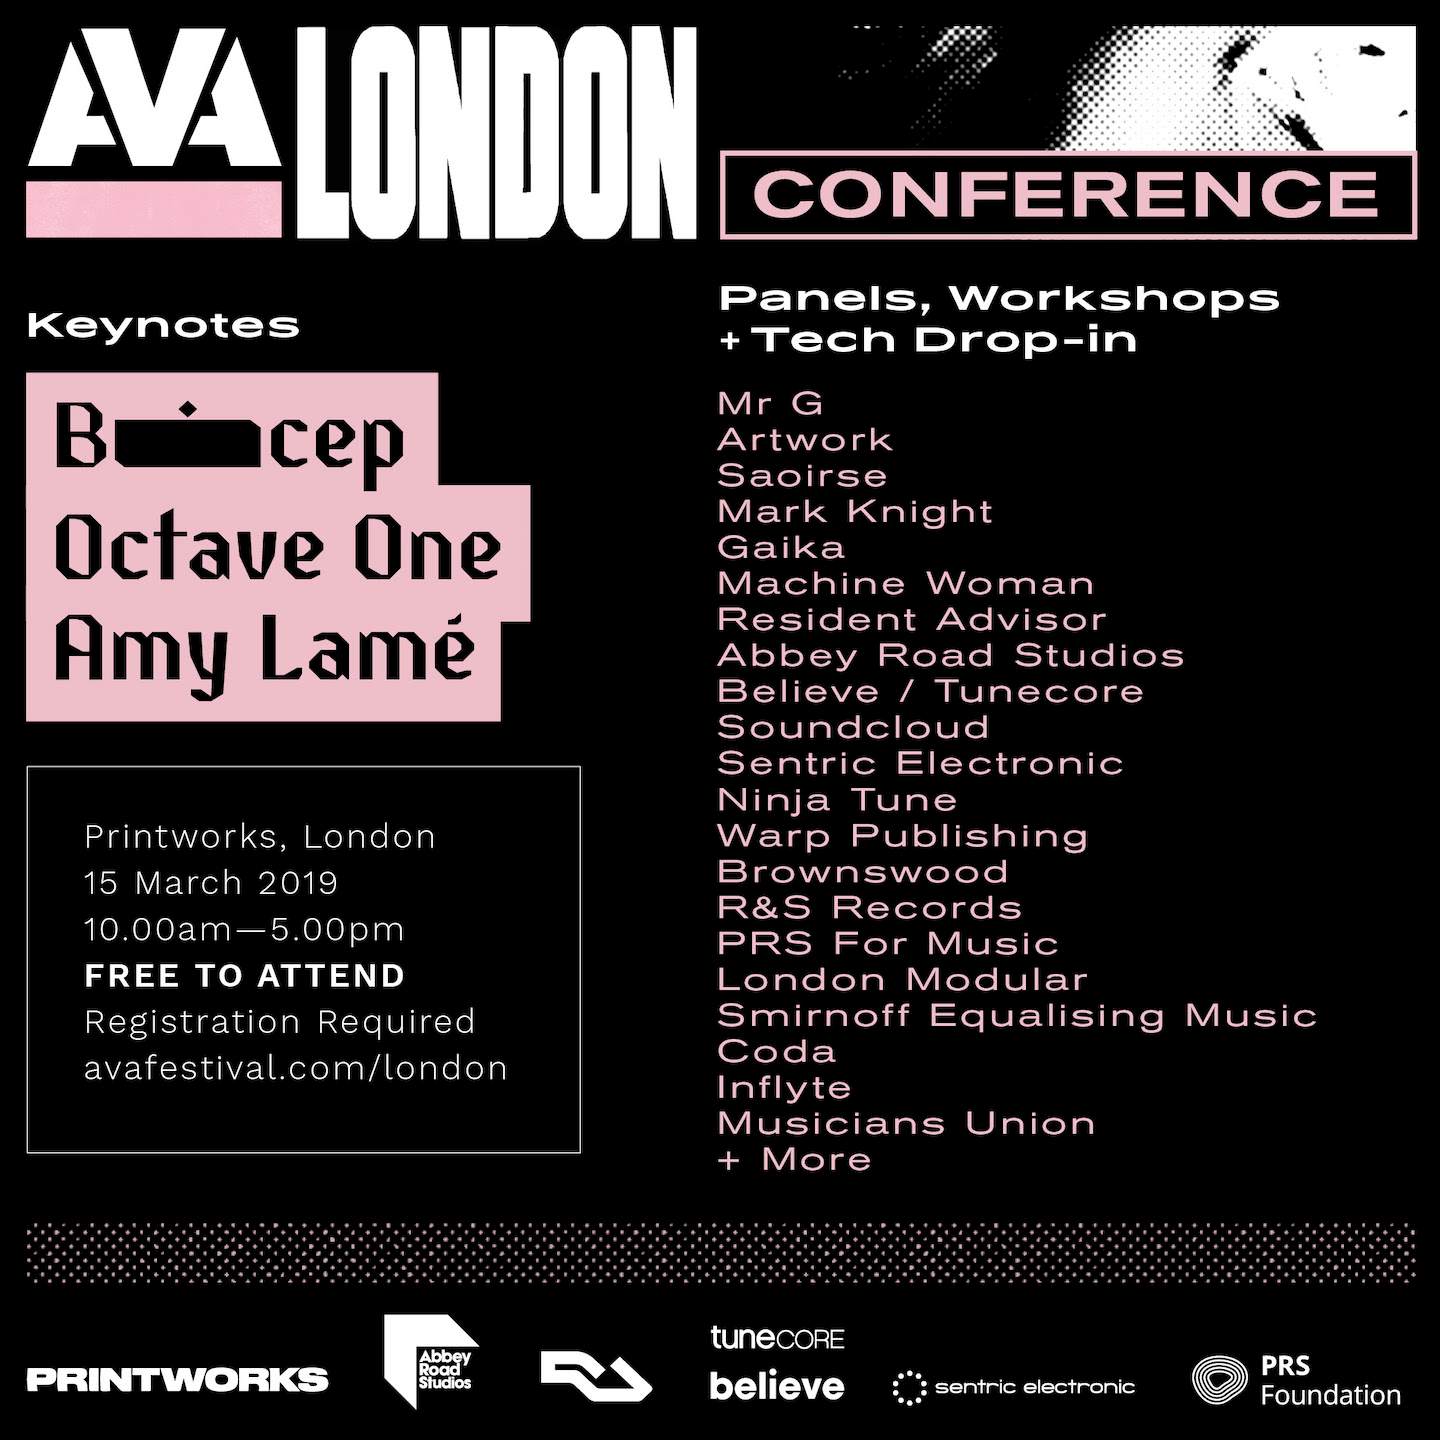 AVA London Conference adds RA Exchange with Mr. G image